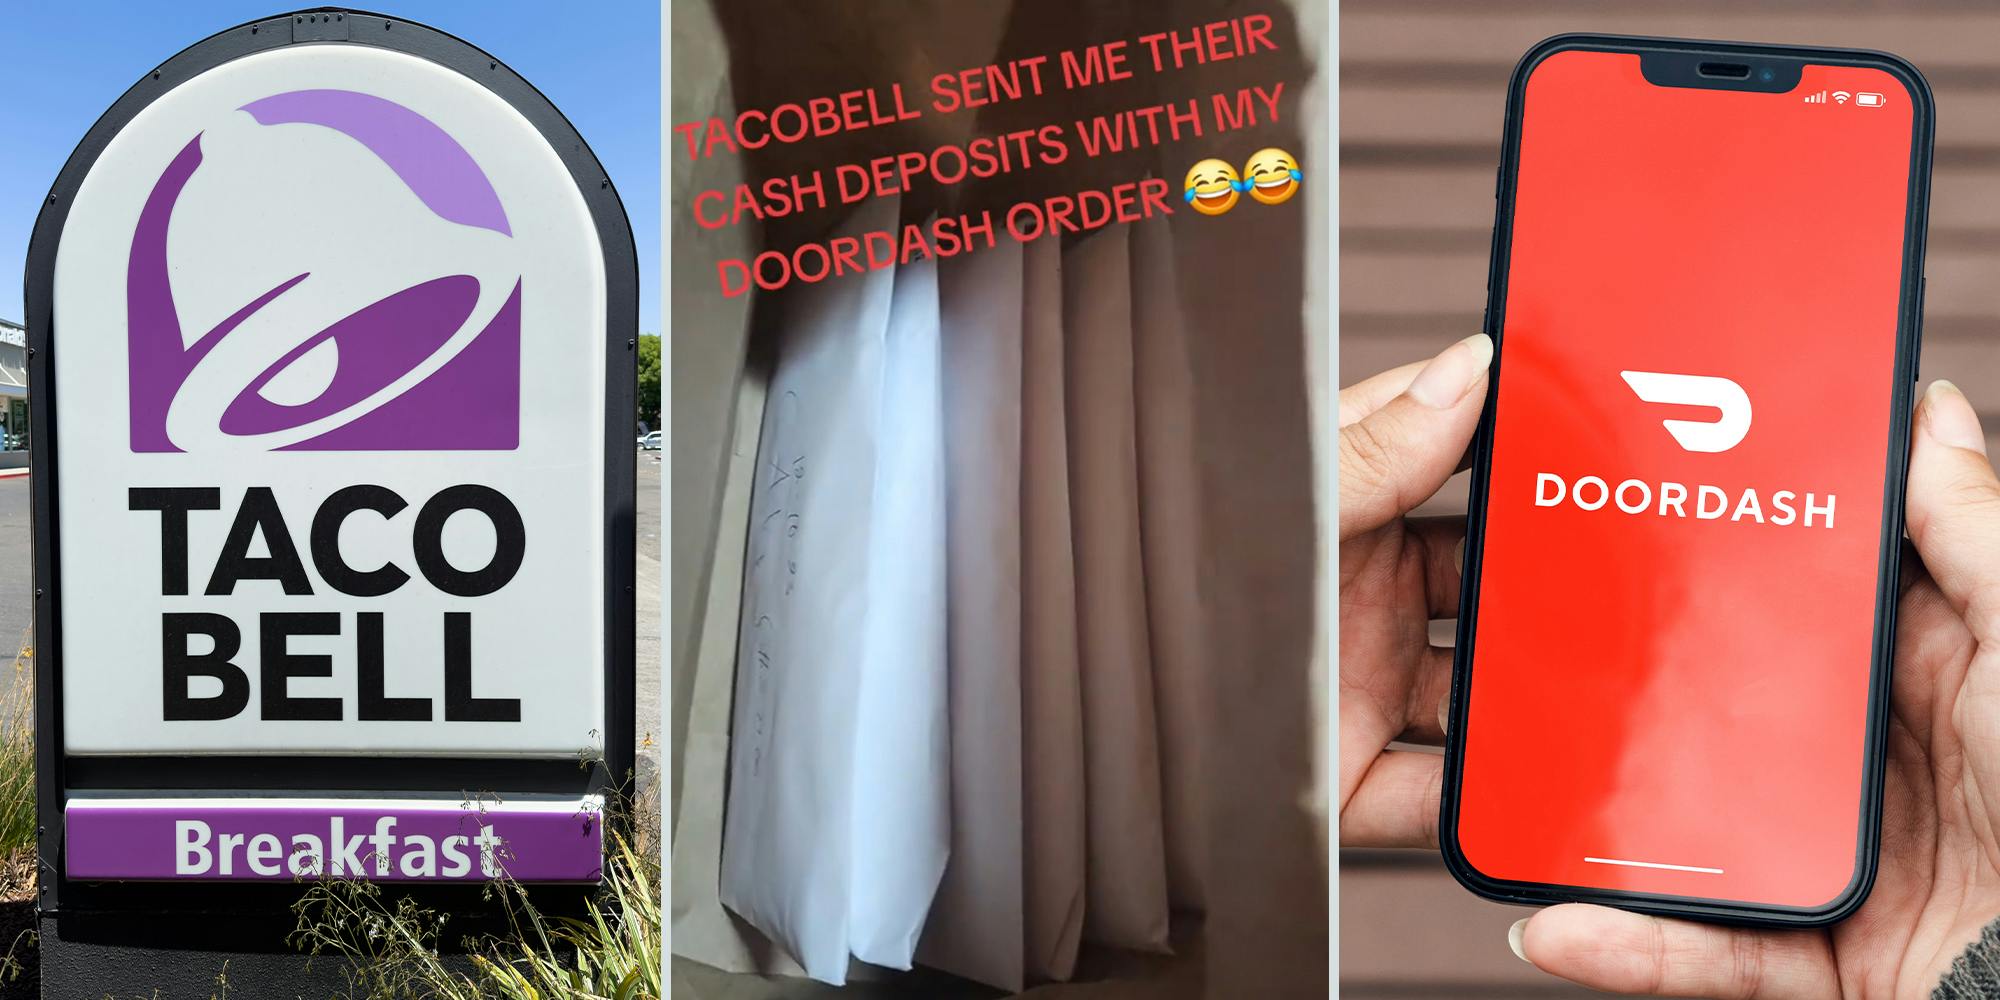 Customer orders Taco Bell through DoorDash, gets so much more than expected